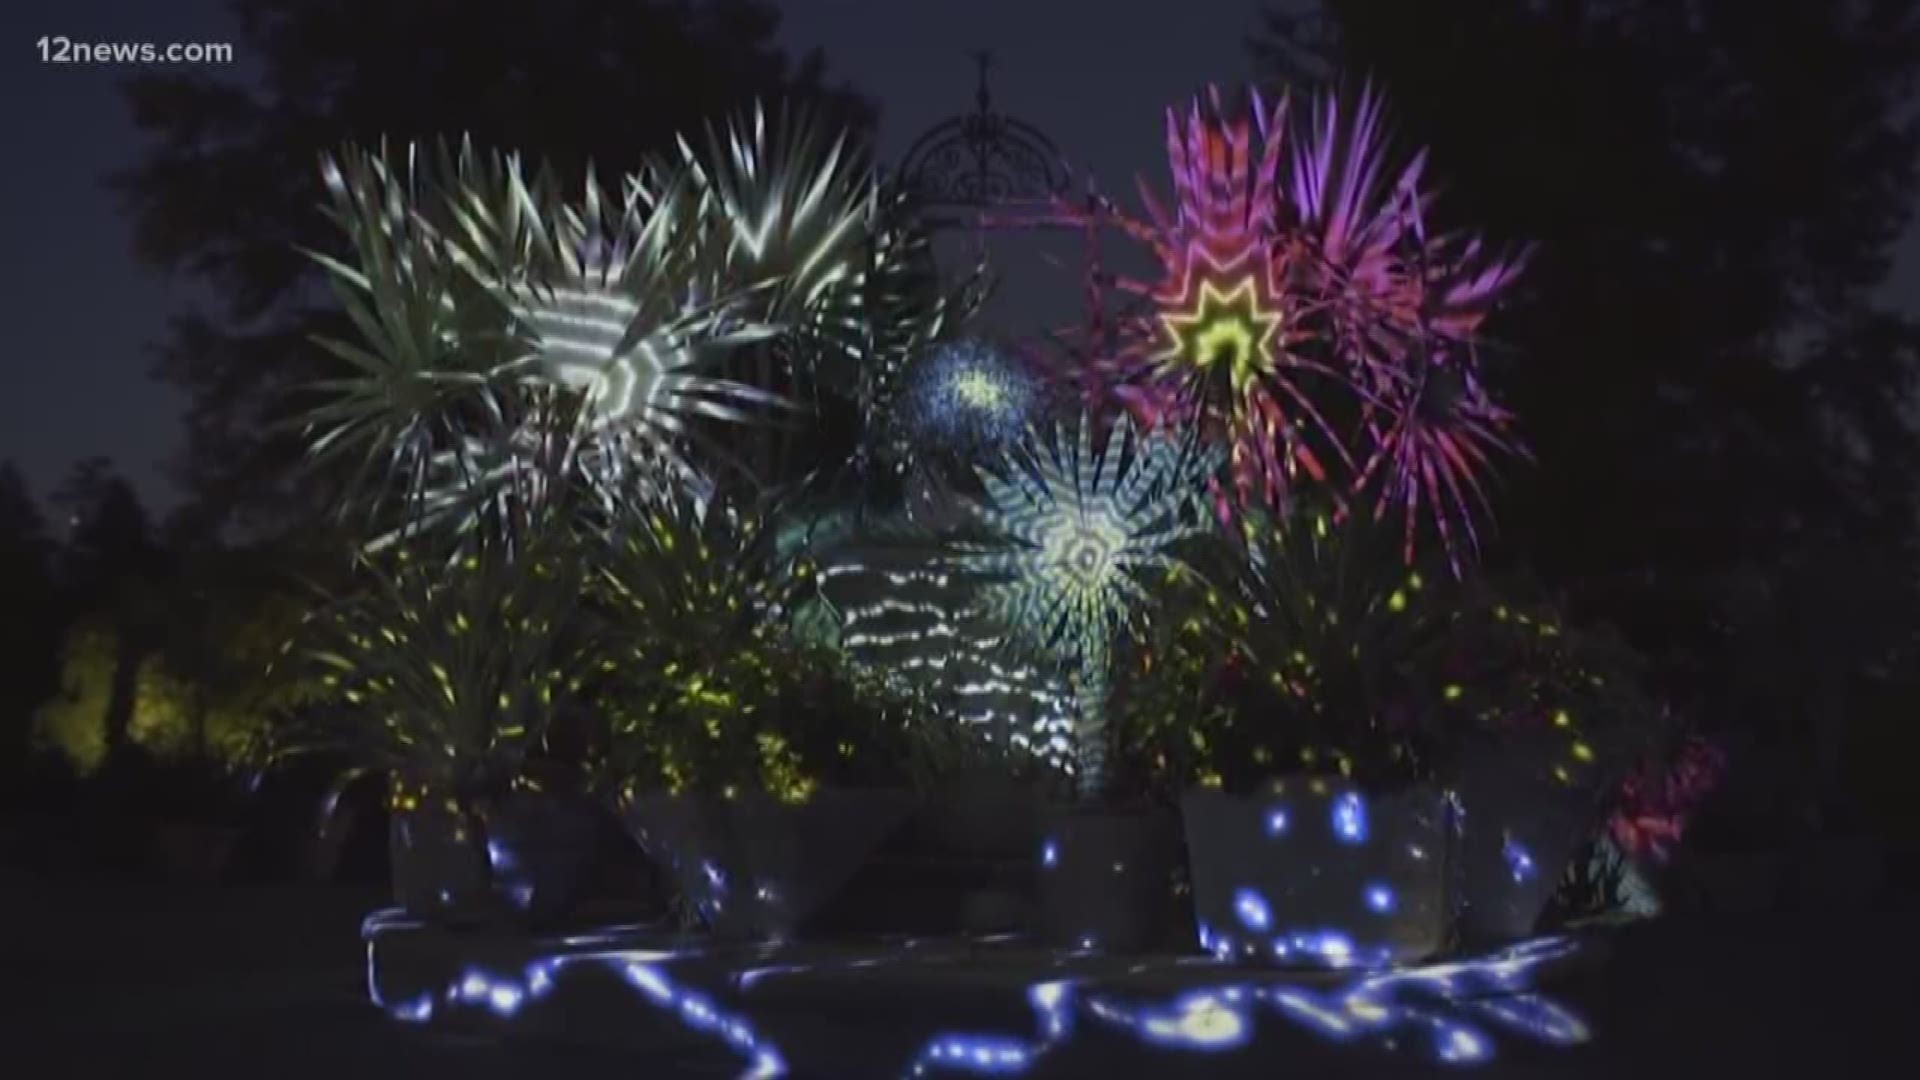 Through Mother's Day weekend you can see the desert light up in a whole new way. An electric light and sound display has transformed the Desert Botanical Garden in Phoenix.